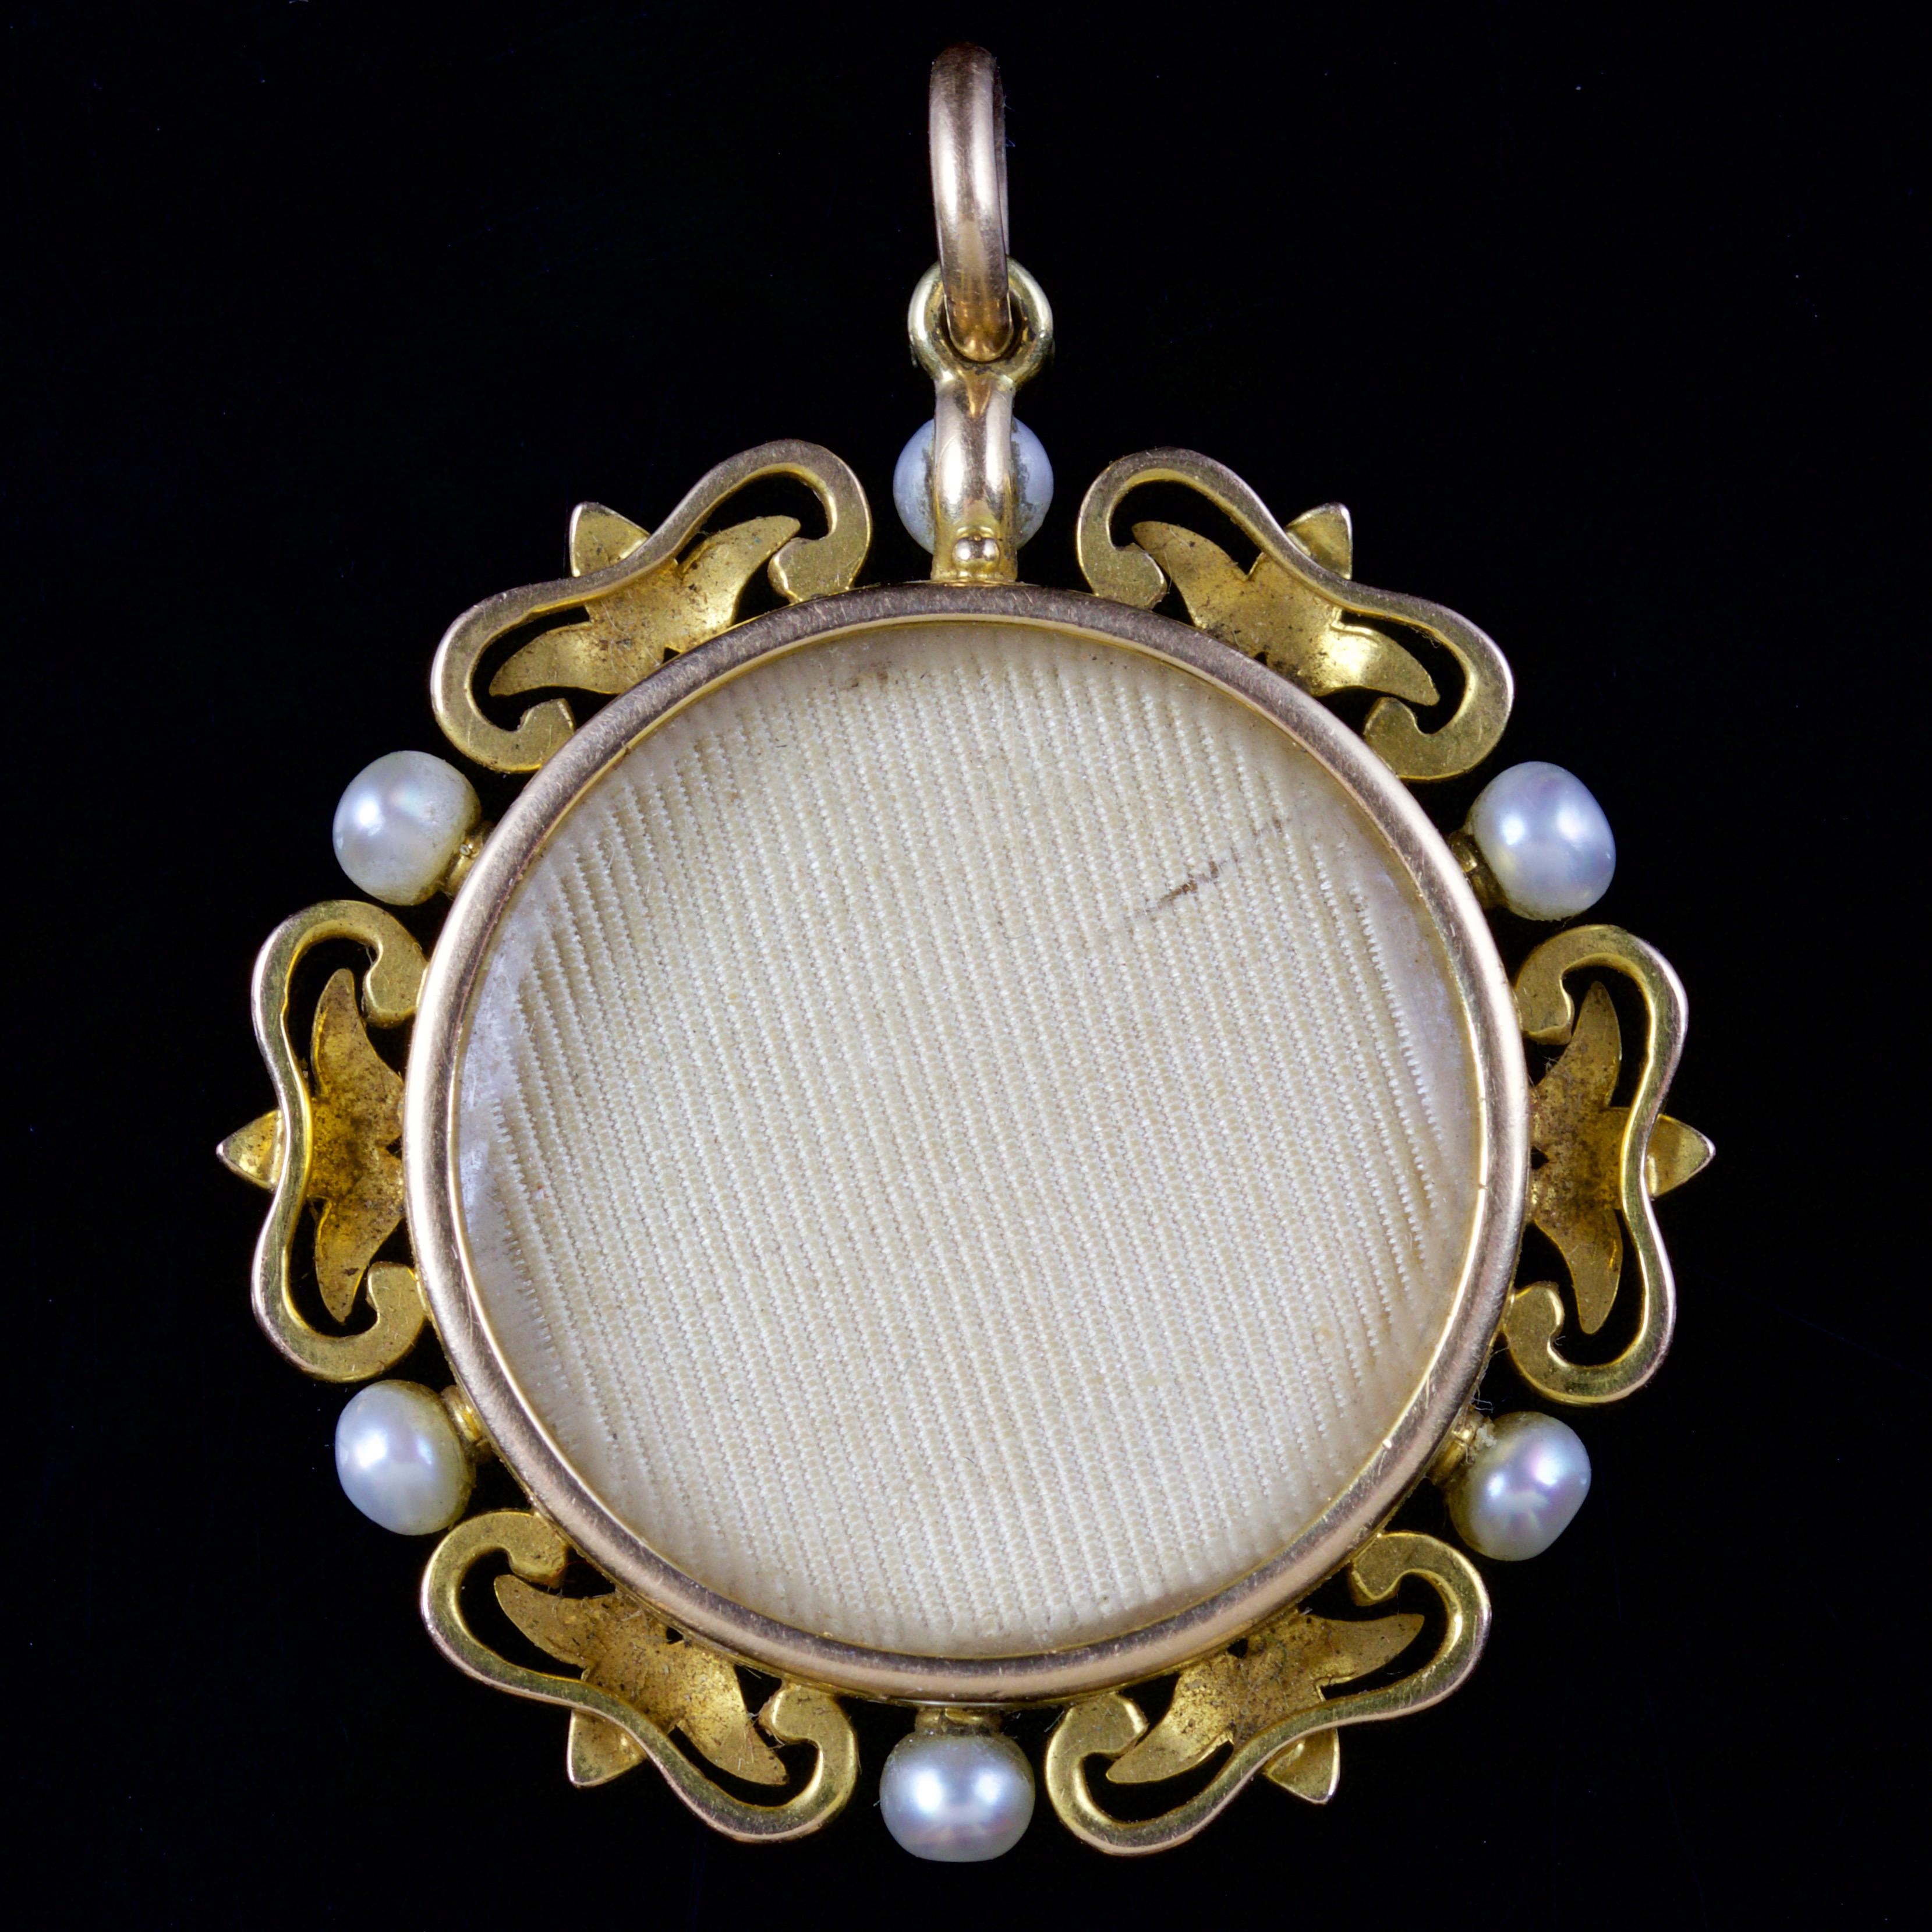 This beautiful Edwardian double locket pendant is set in 18ct Gold, Circa 1915.

The locket is decorated in a halo of natural Pearls set in-between a fabulous 18ct Gold border.

The combination of Pearls against the Gold gallery compliments each